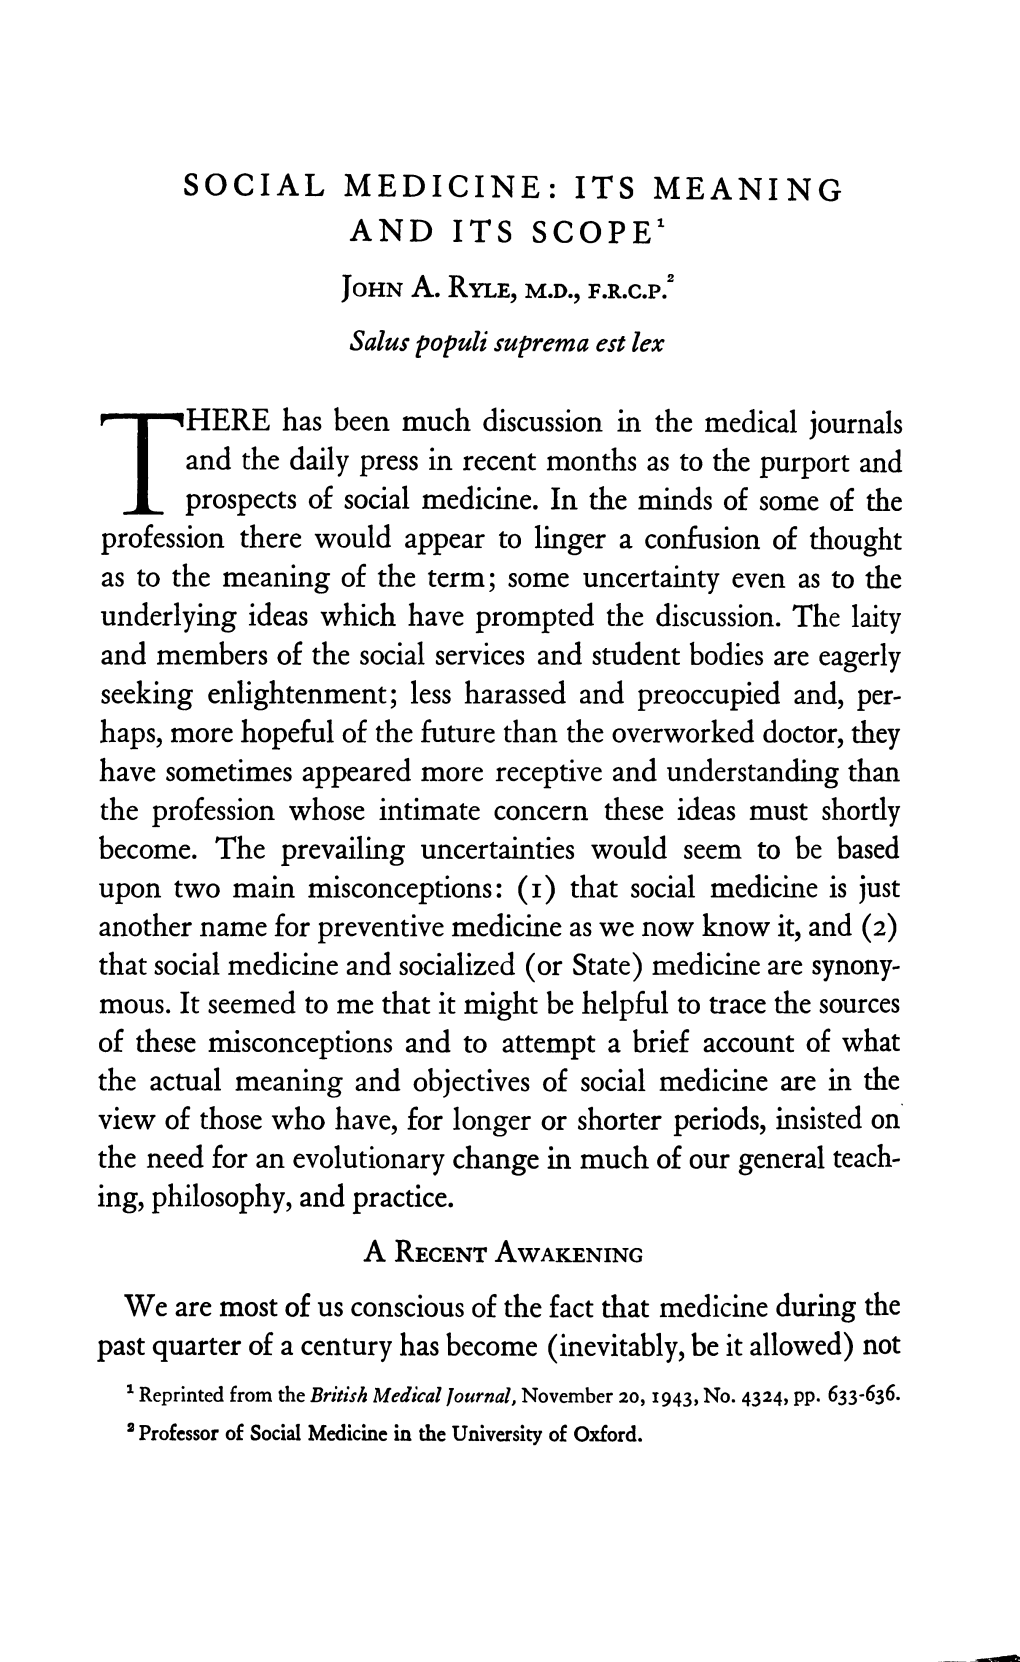 Social Medicine: Its Meaning and Its Scope'